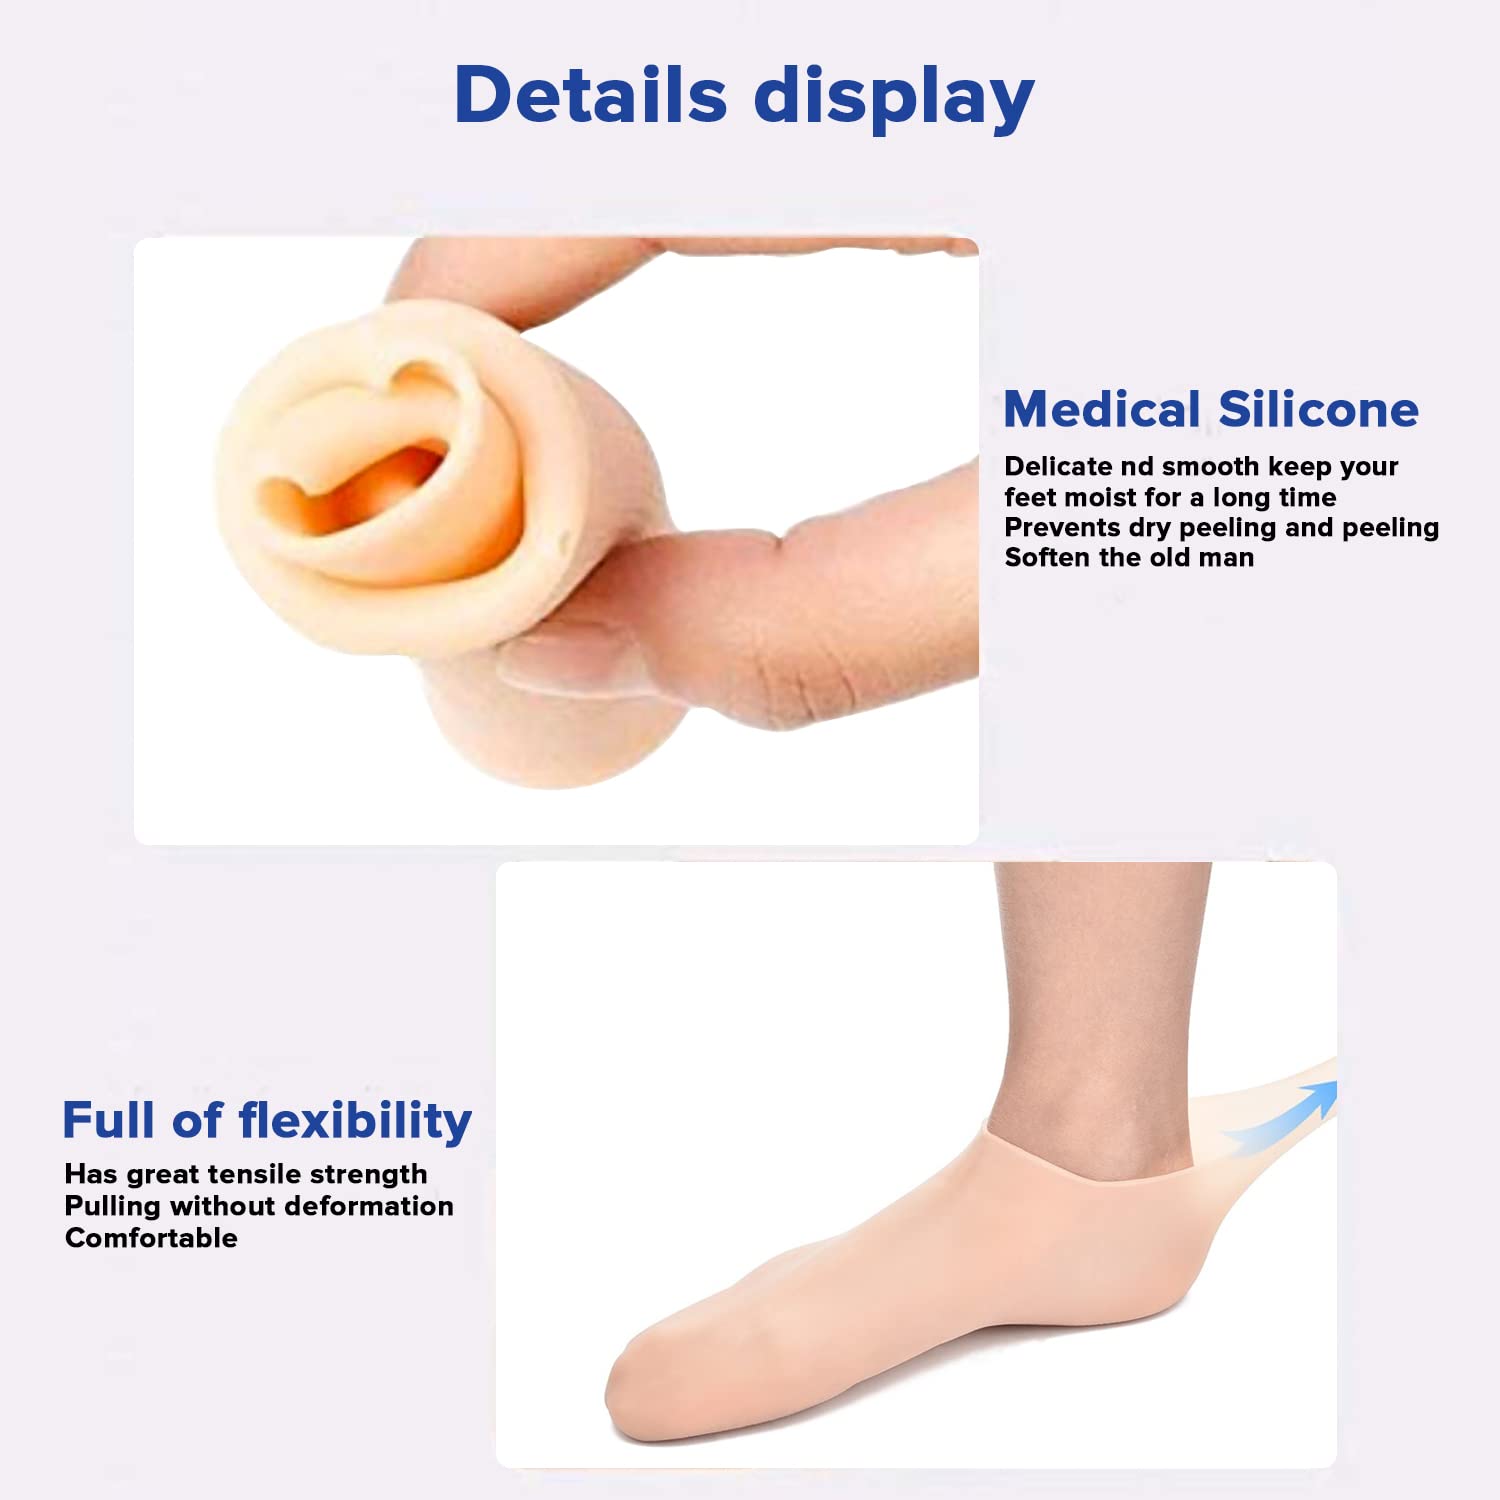 Dr Foot Silicone Moisturizing Heel Socks | For Dry, Cracked Heels, Rough Skin, Dead Skin, Calluses Remover | For Both Men & Women | Full Length, Small Size – 1 Pair